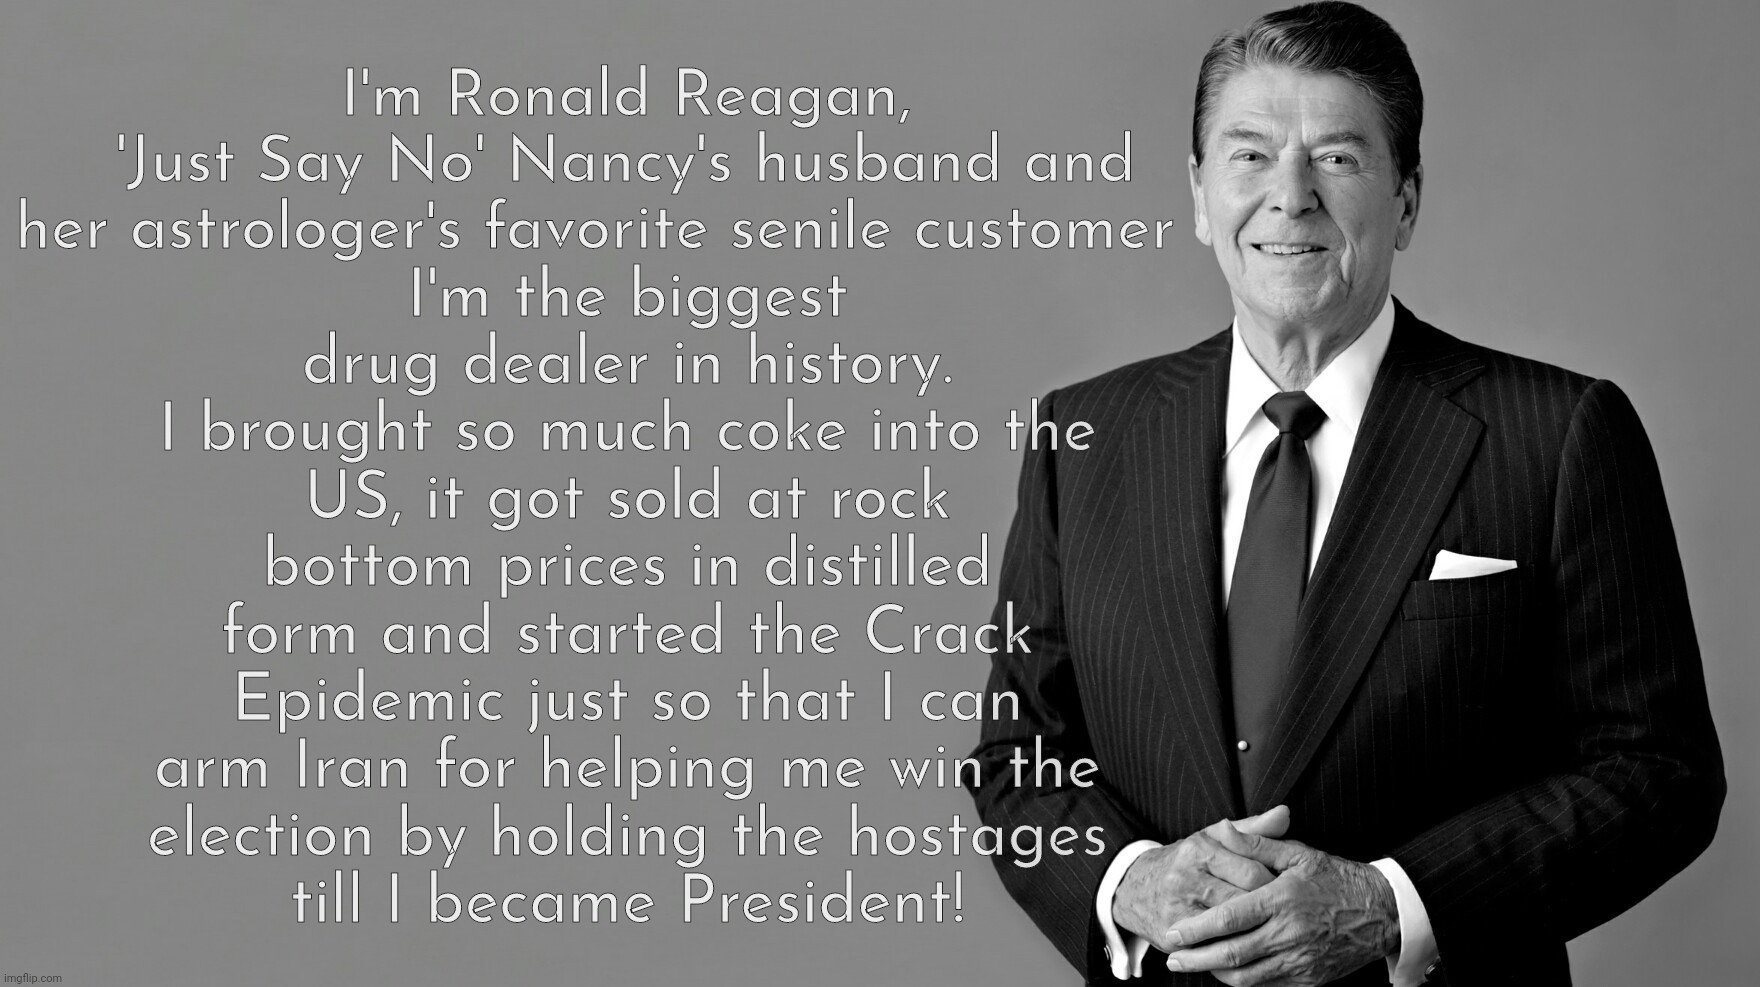 Ronald Reagan, biggest drug dealer history | I'm the biggest drug dealer in history.
I brought so much coke into the US, it got sold at rock bottom prices in distilled form and started the Crack Epidemic just so that I can
arm Iran for helping me win the
election by holding the hostages
till I became President! I'm Ronald Reagan,
'Just Say No' Nancy's husband and
her astrologer's favorite senile customer | image tagged in ronald reagan,just say no to drugs,crack epidemic,reagan started the crack epidemic,biggest coke dealer in history,gop hypocrite | made w/ Imgflip meme maker